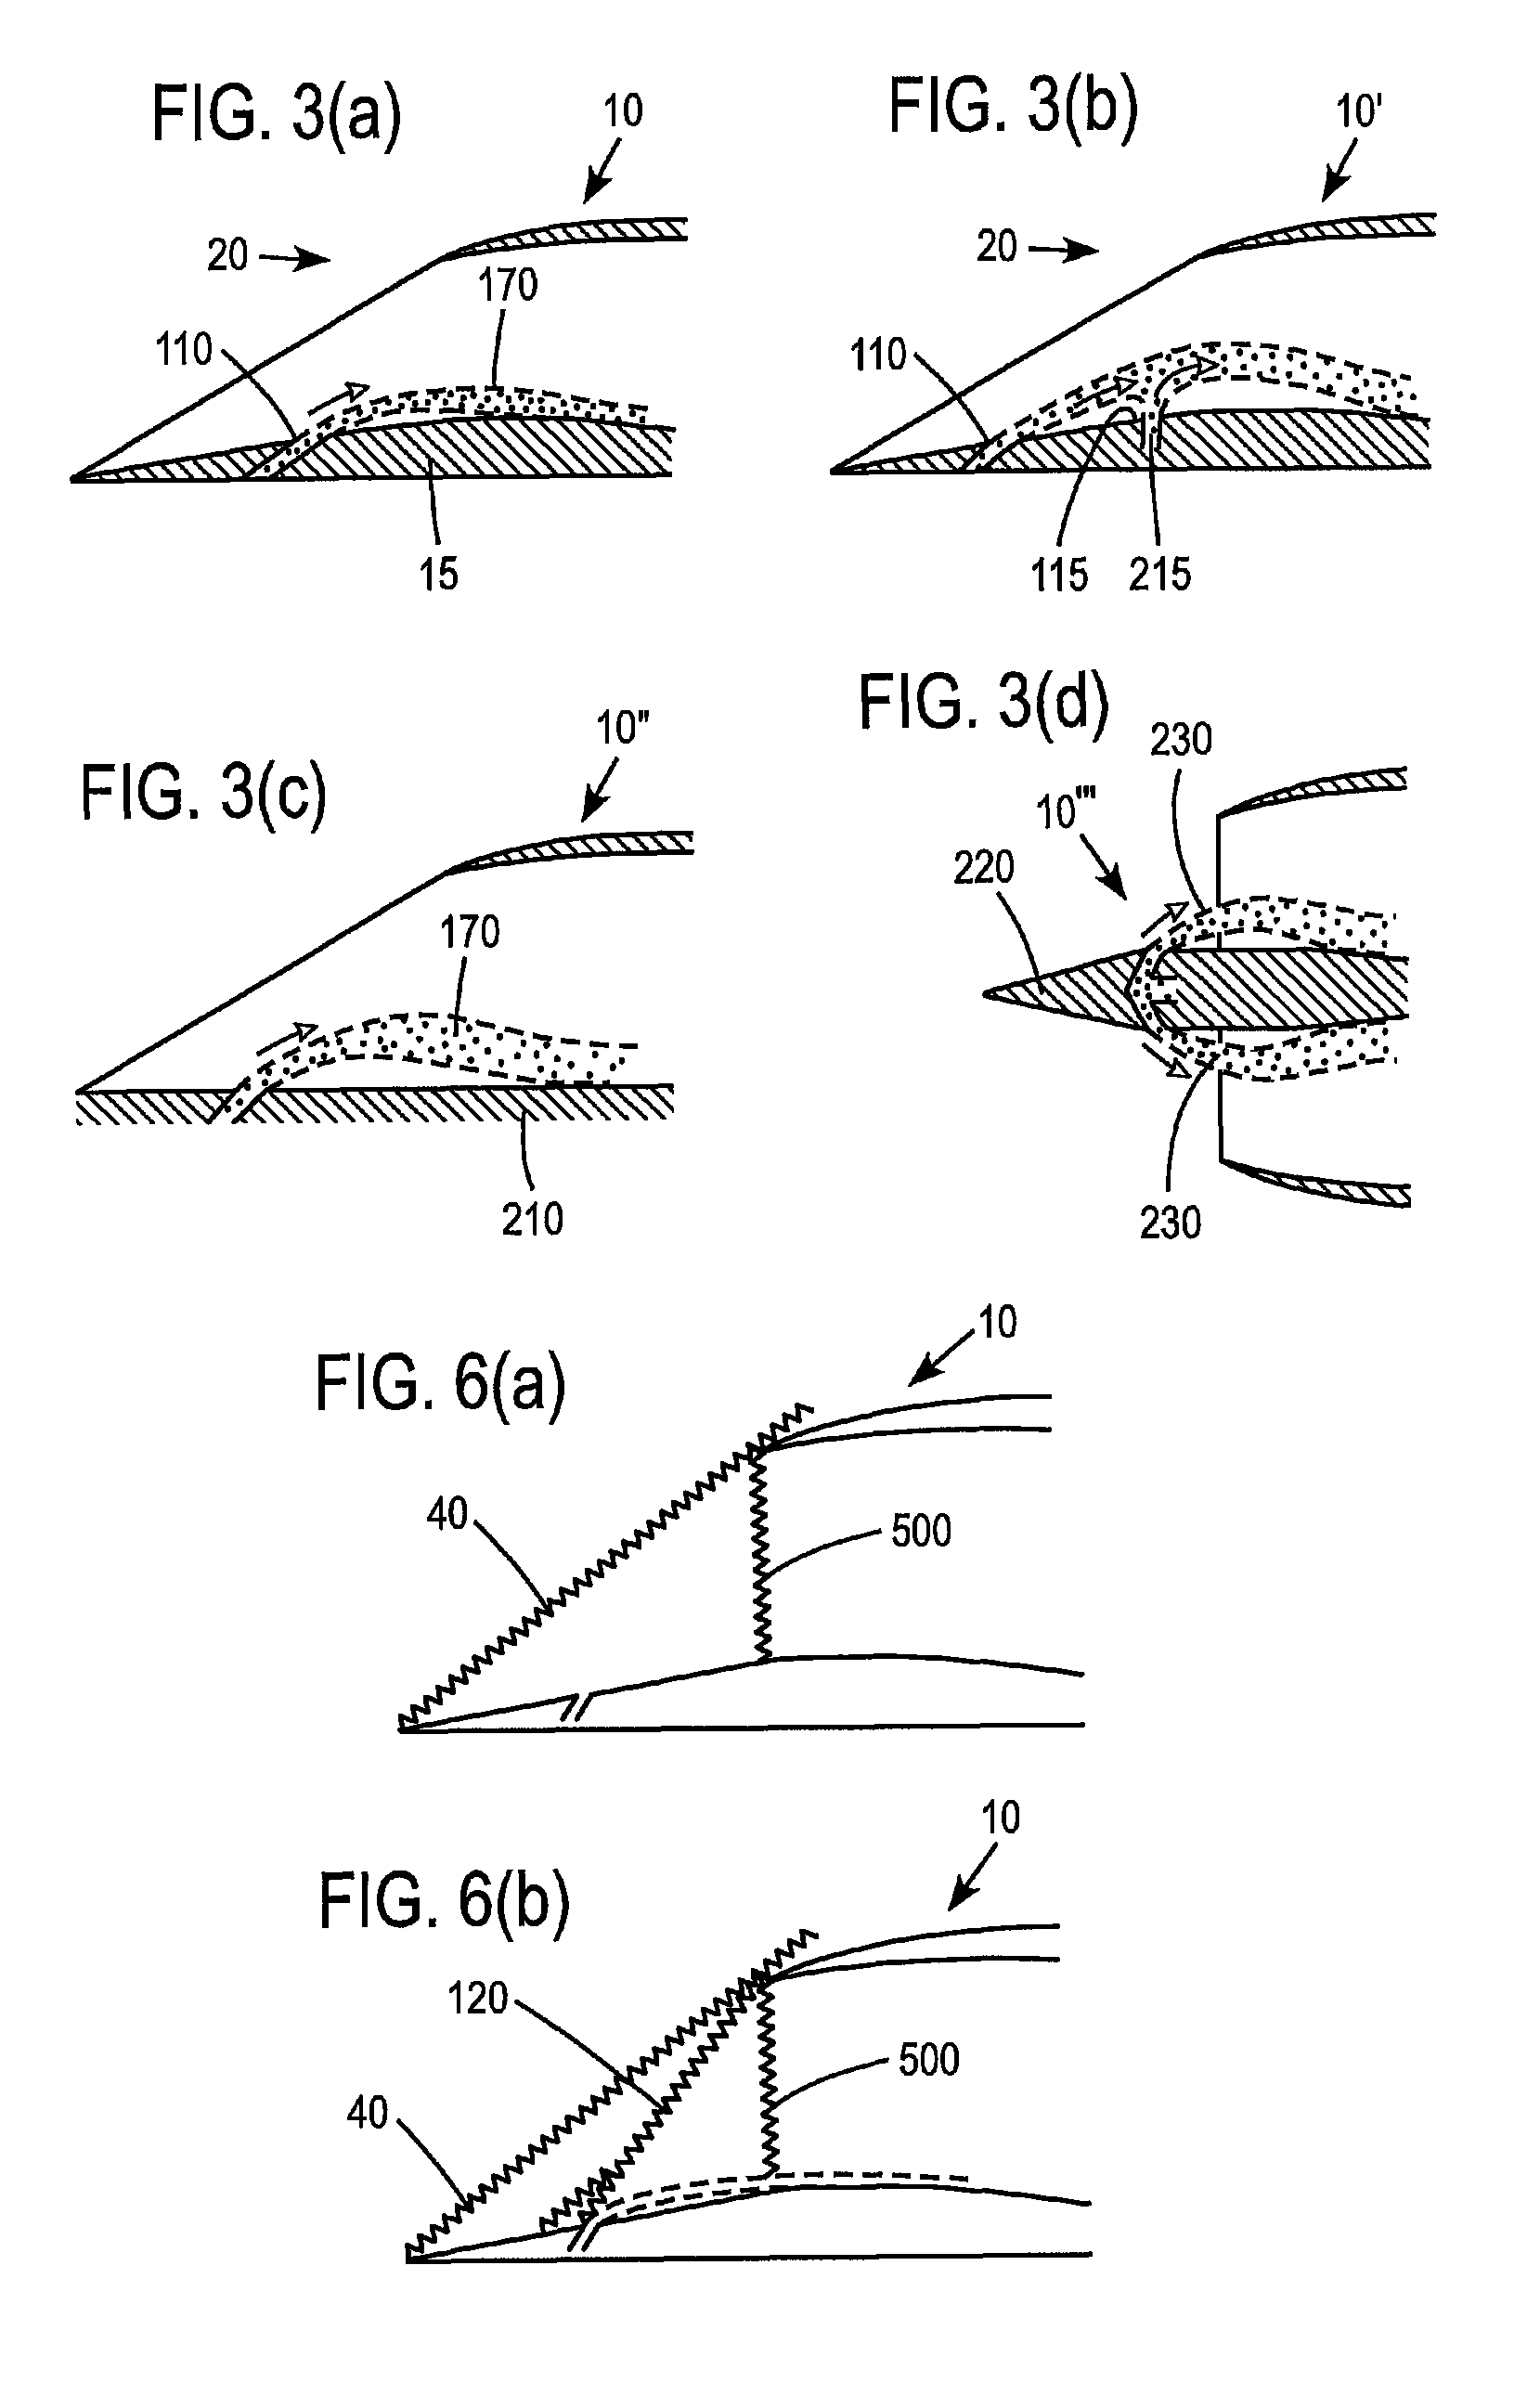 Relating to air-breathing flight vehicles